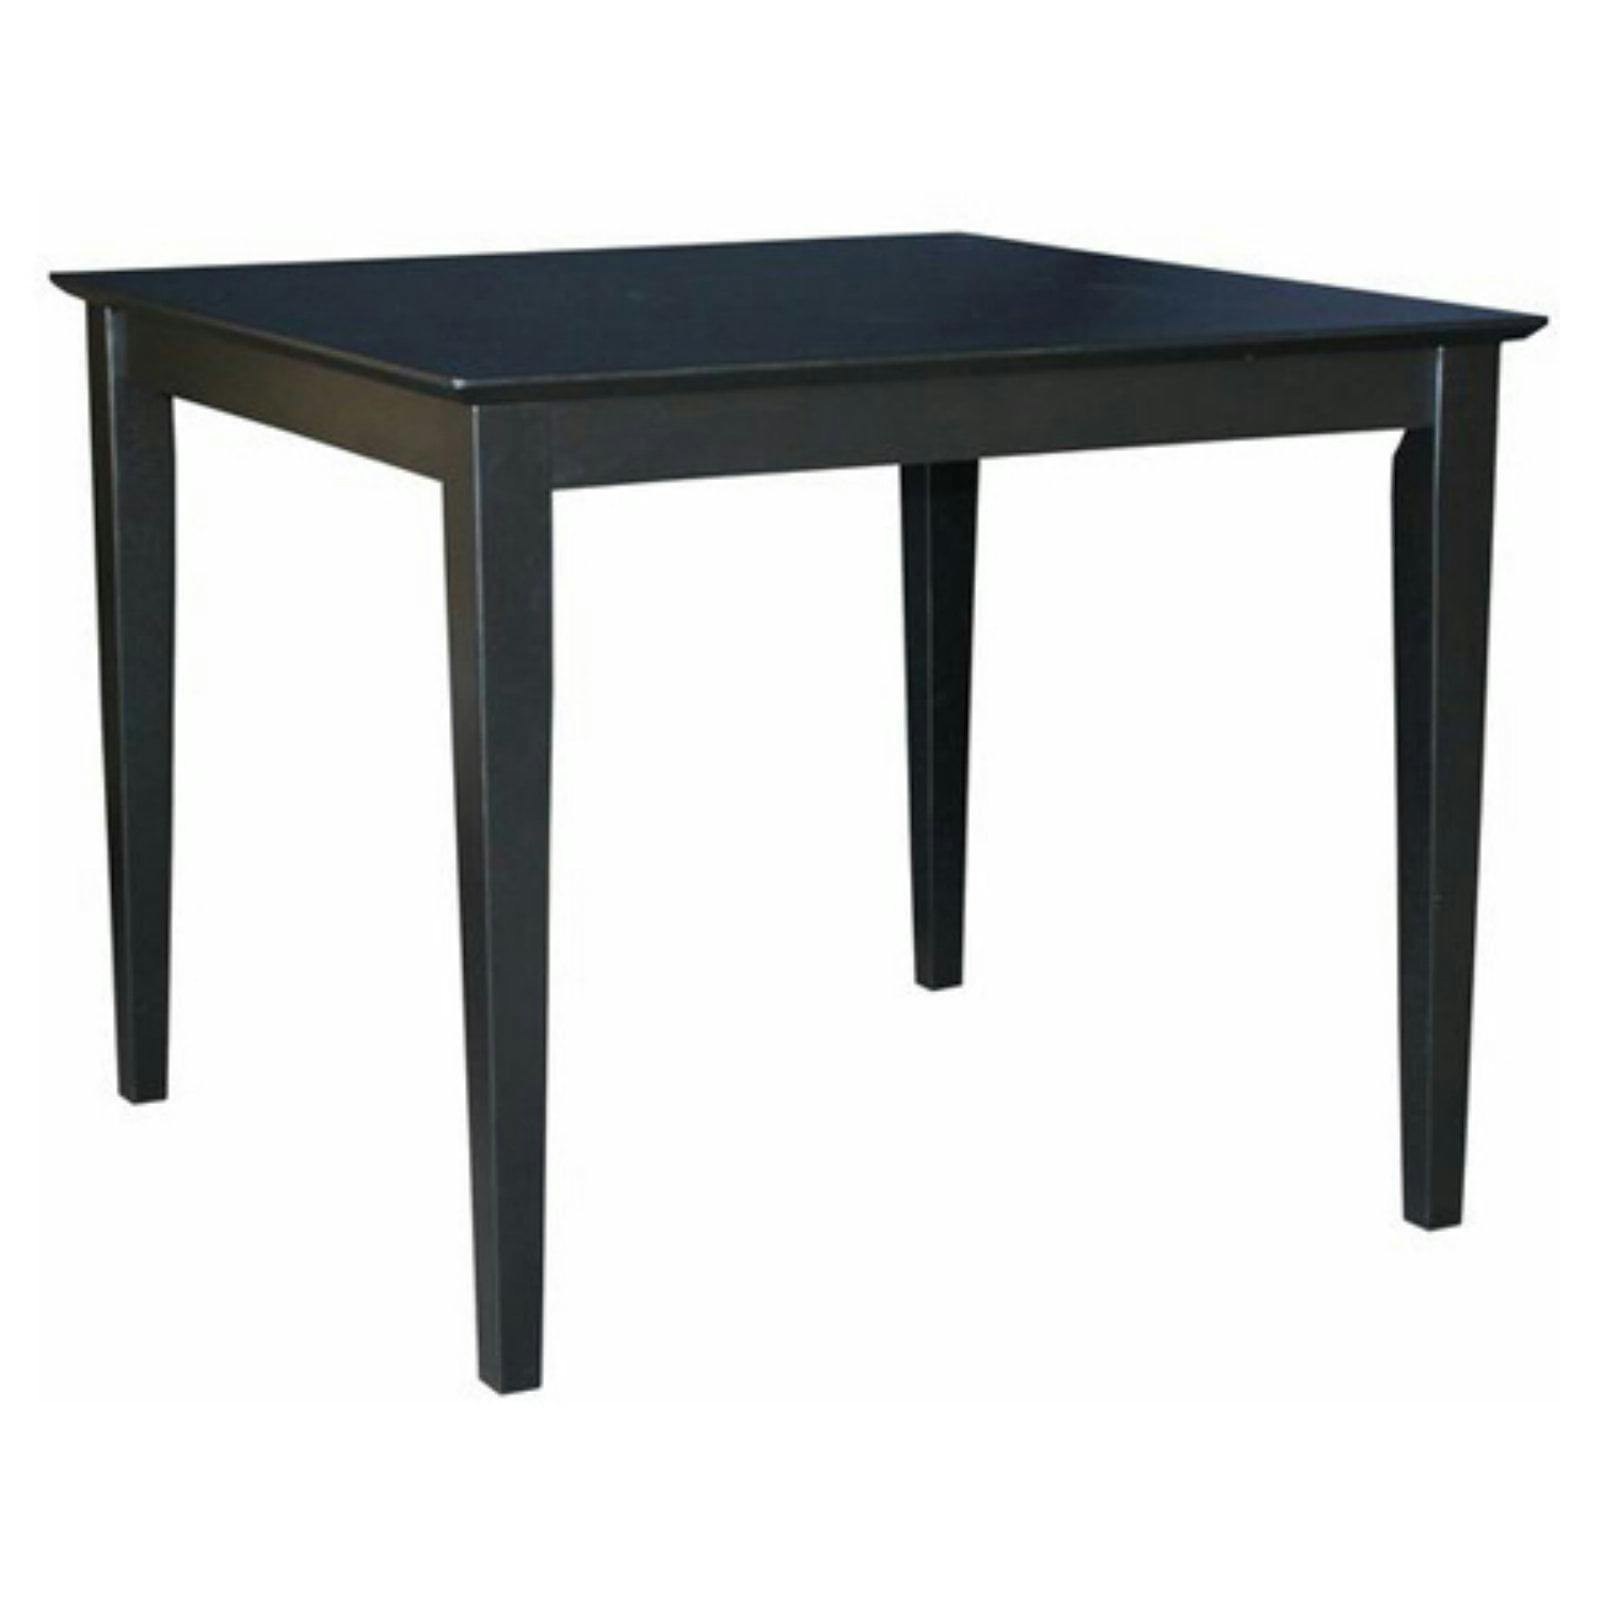 Elegant Transitional Solid Wood Dining Table with Shaker Legs - Black